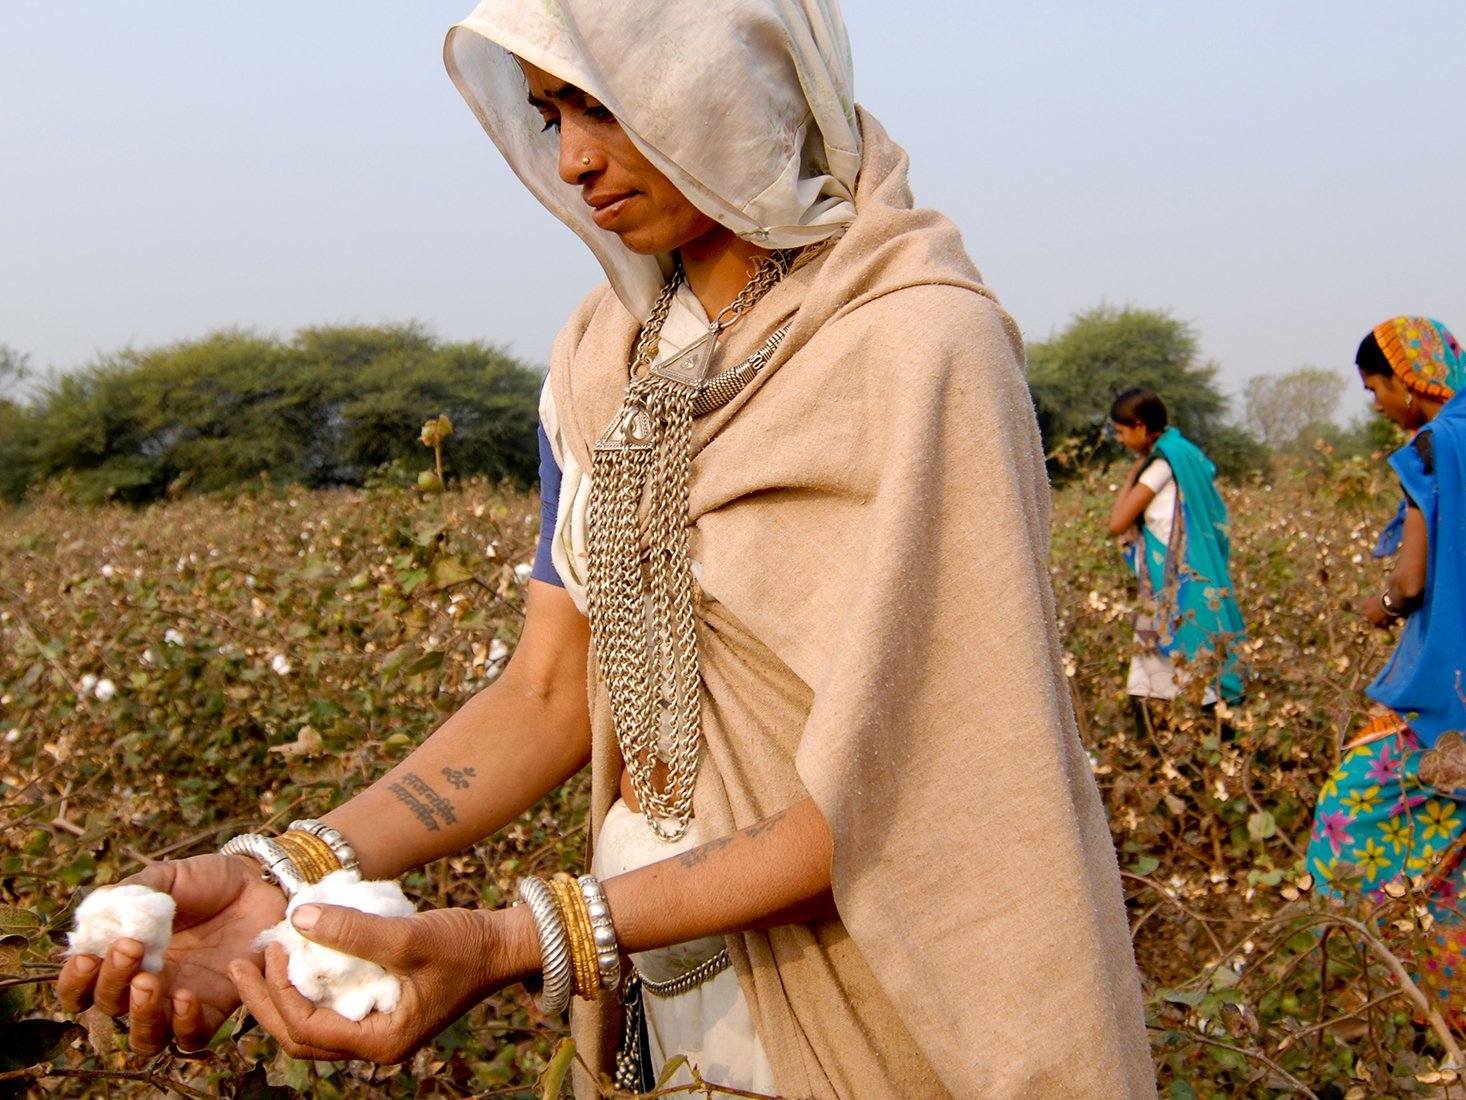 Where does our organic cotton come from?